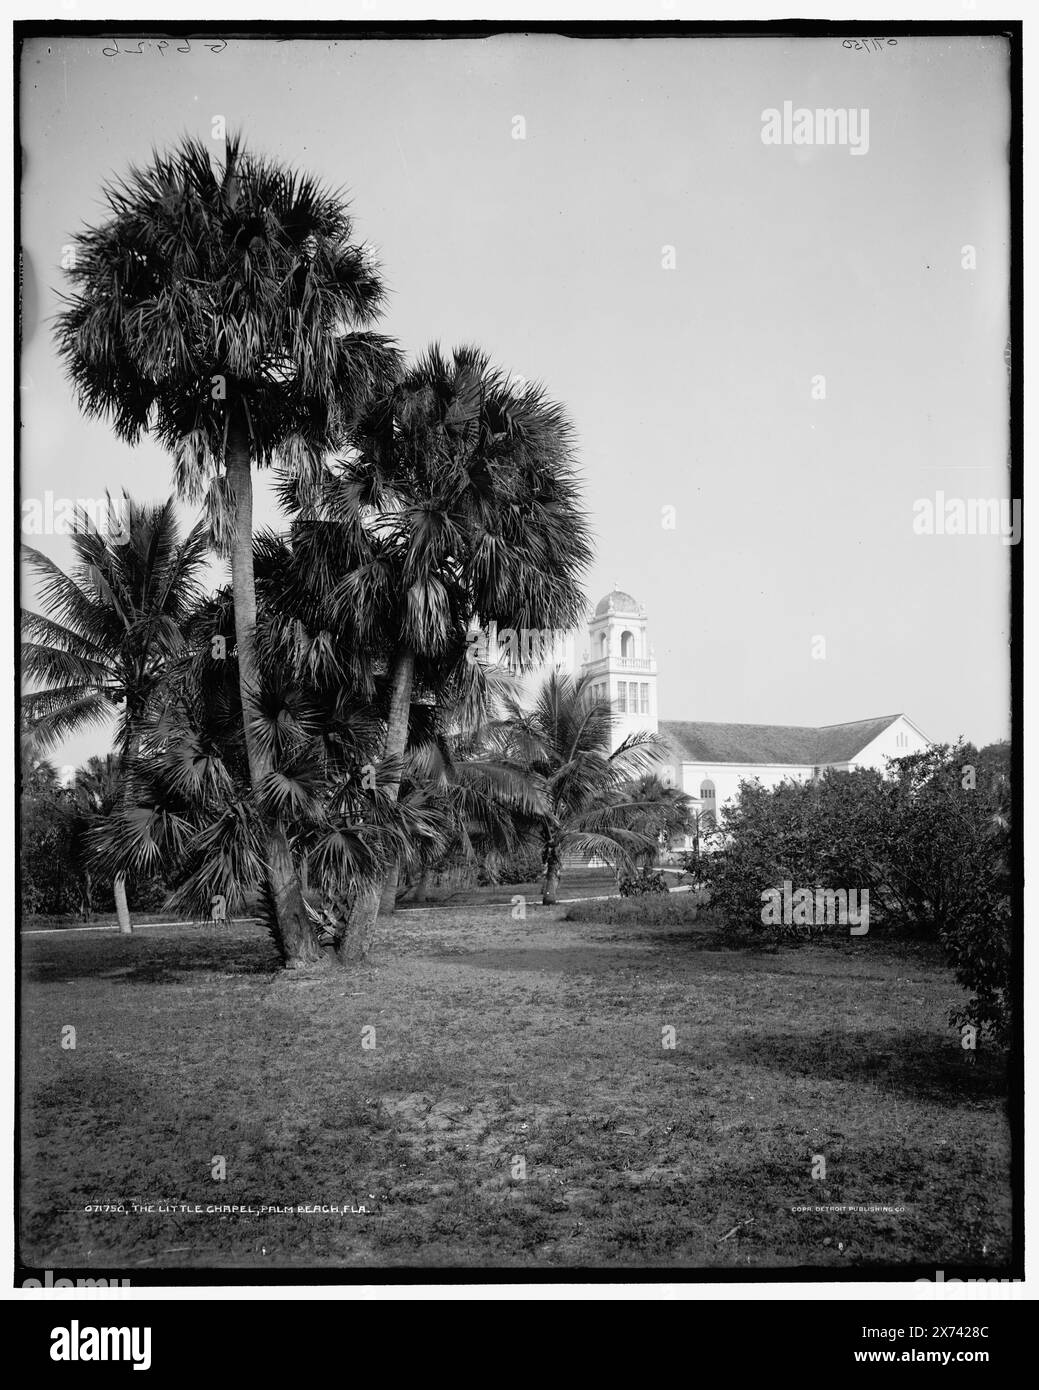 The Little chapel Bethesda by the Sea, Palm Beach, Fla., 'G 6926' on negative., Detroit Publishing Co. no. 071750., Gift; State Historical Society of Colorado; 1949,  Churches. , Palms. , United States, Florida, Palm Beach. Stock Photo